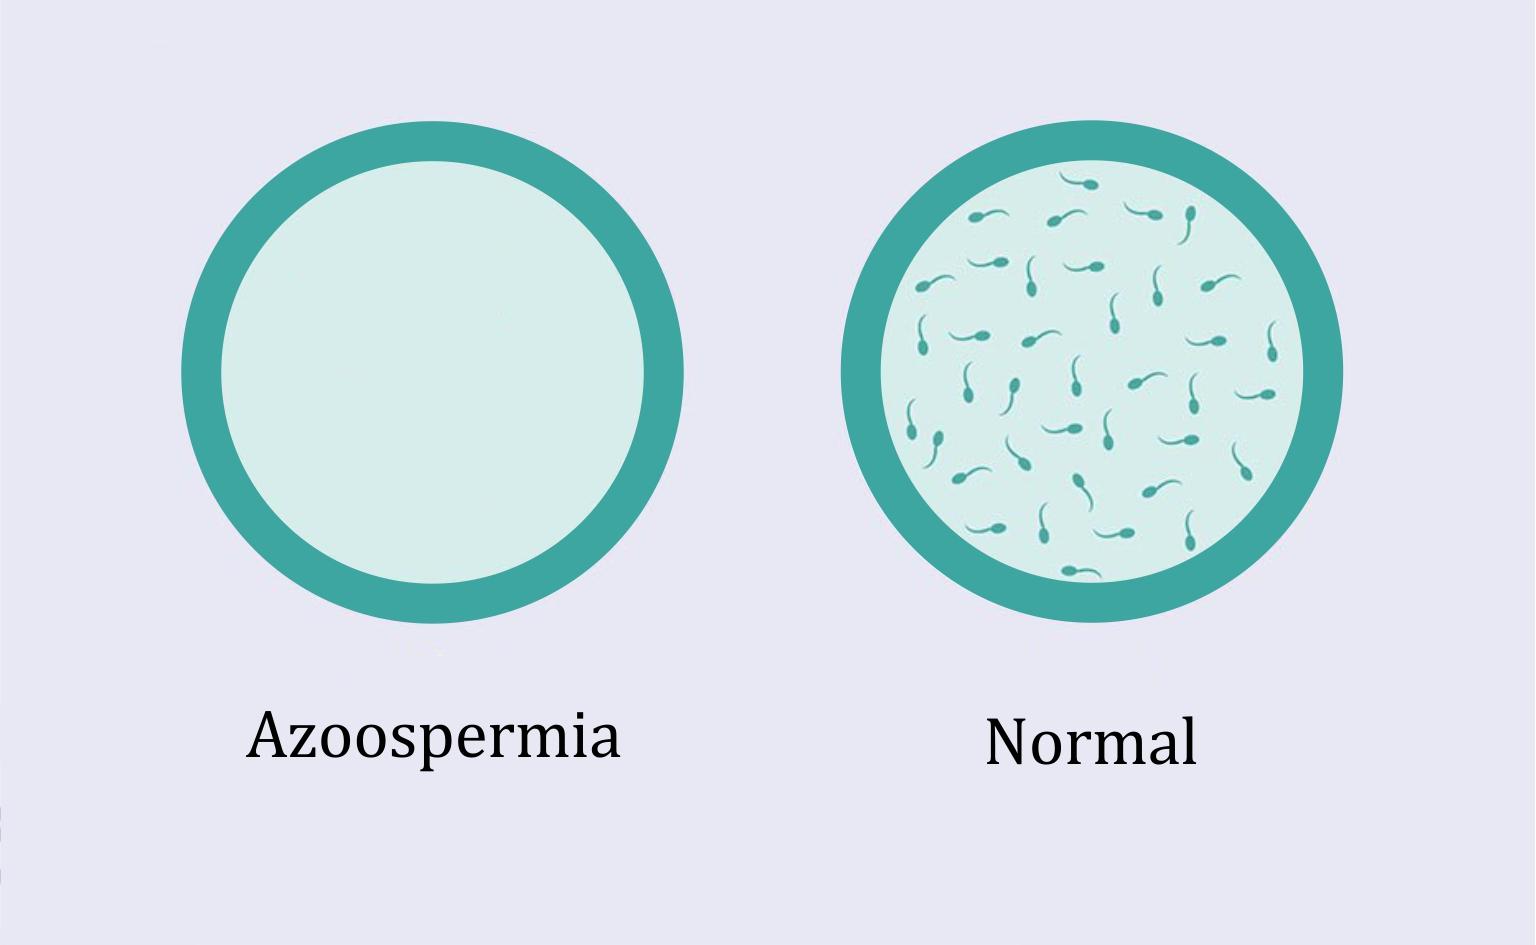 Azoospermia and normal